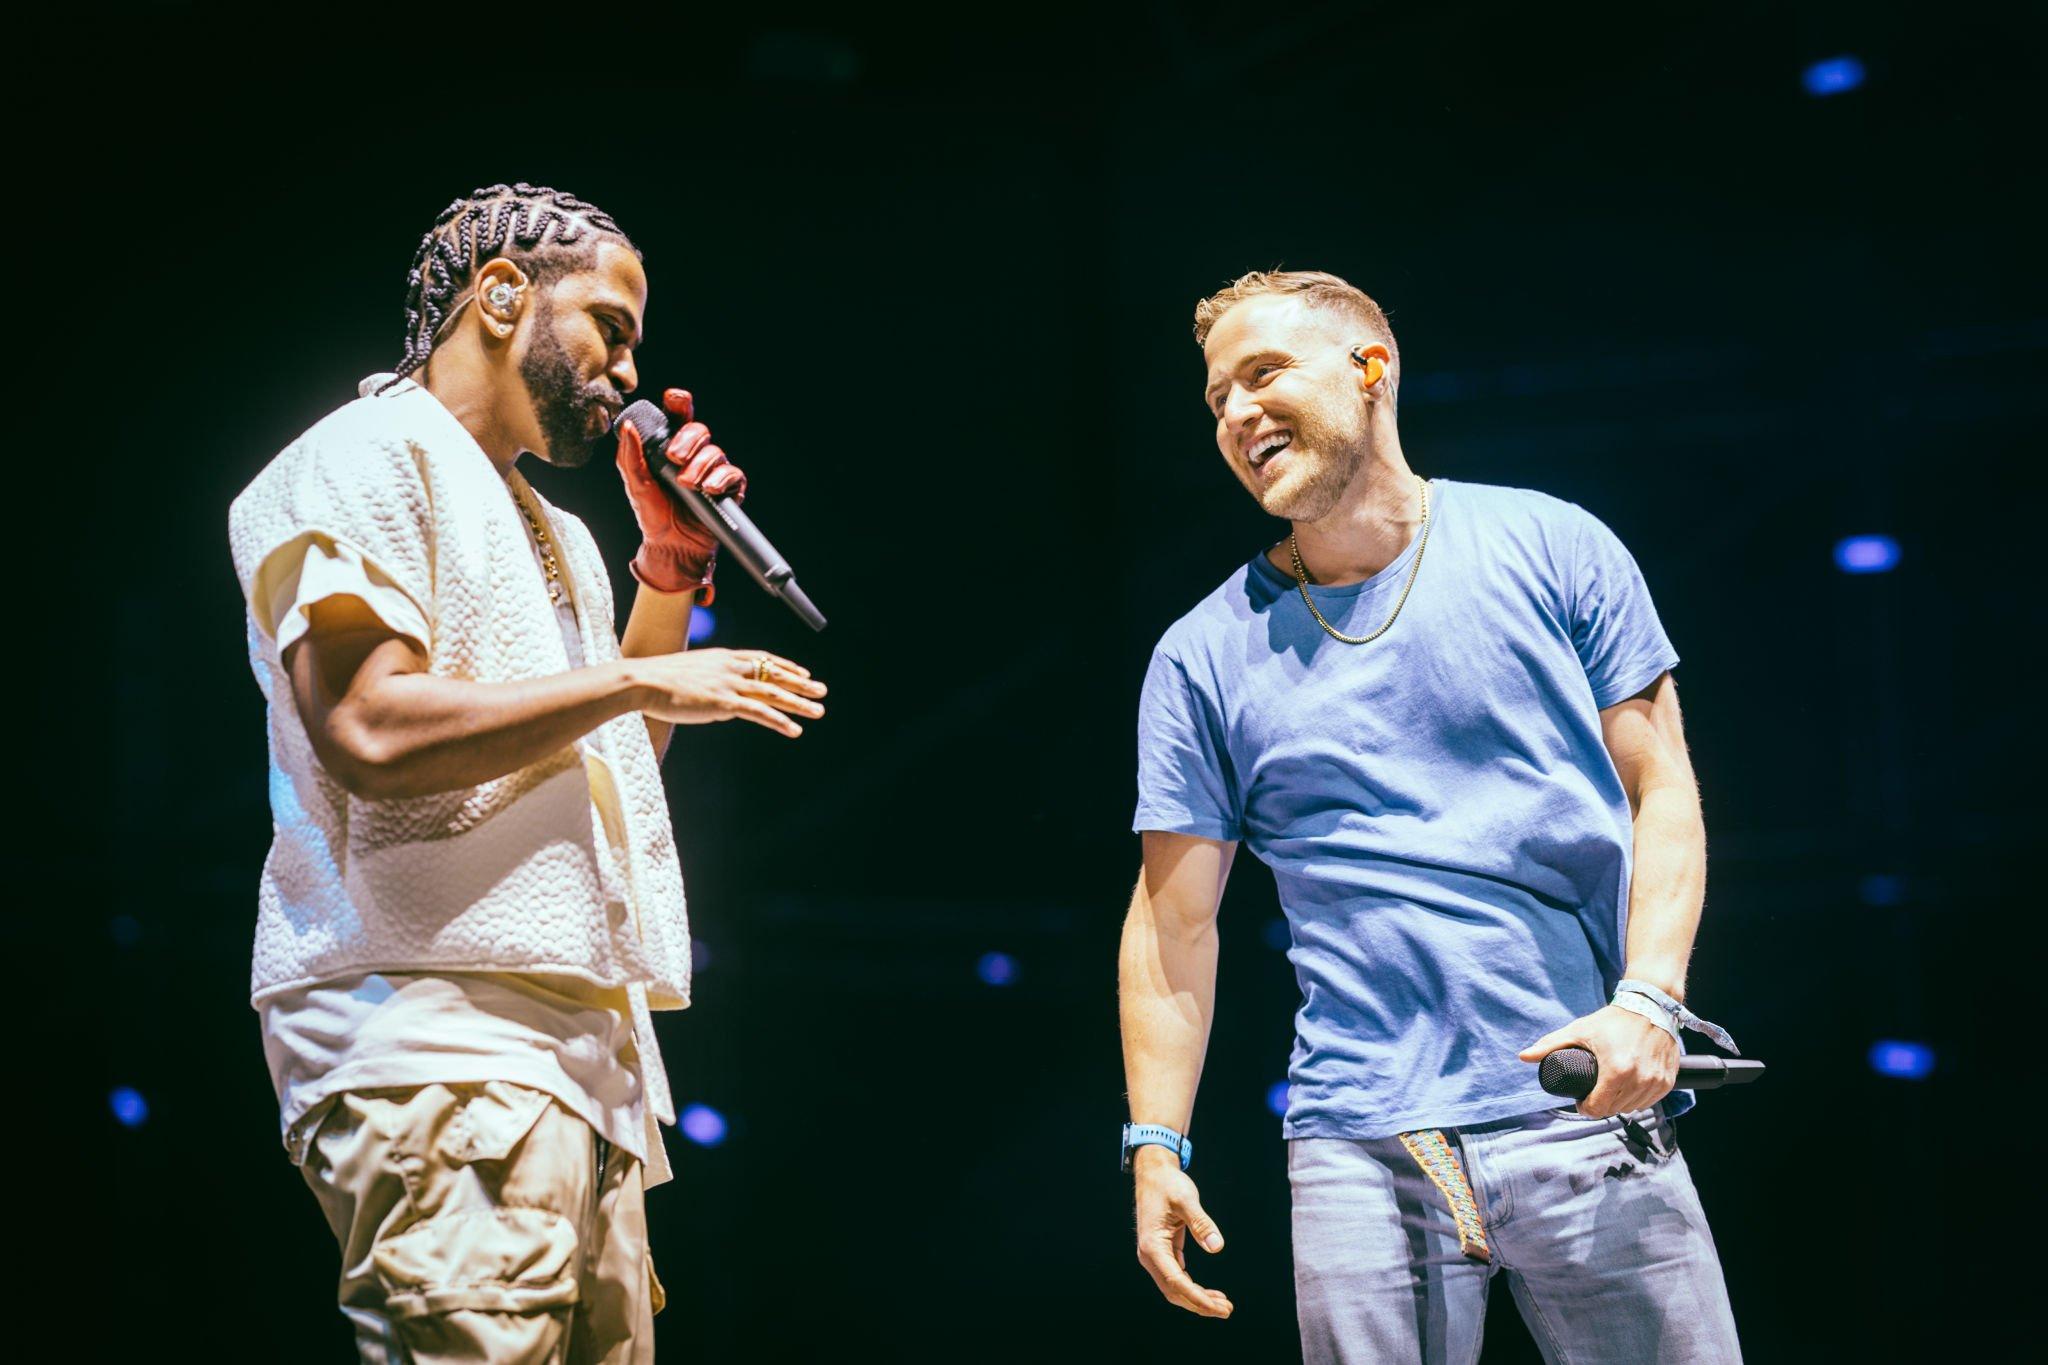 Mike Posner joins Big Sean onstage at 2022 Coachella to perform "Cooler Than Me"
